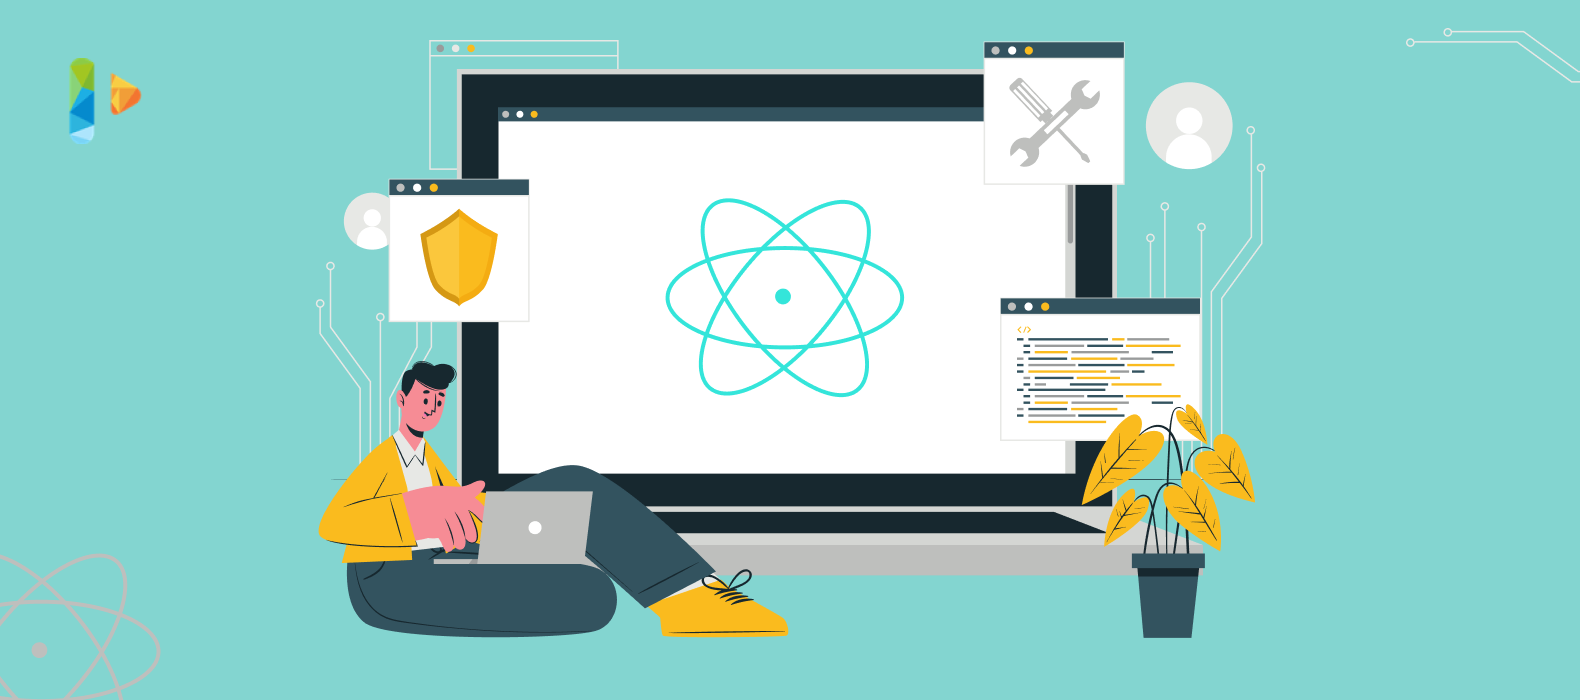 Why React Native for Web Applications? 20 Best React Native Tools